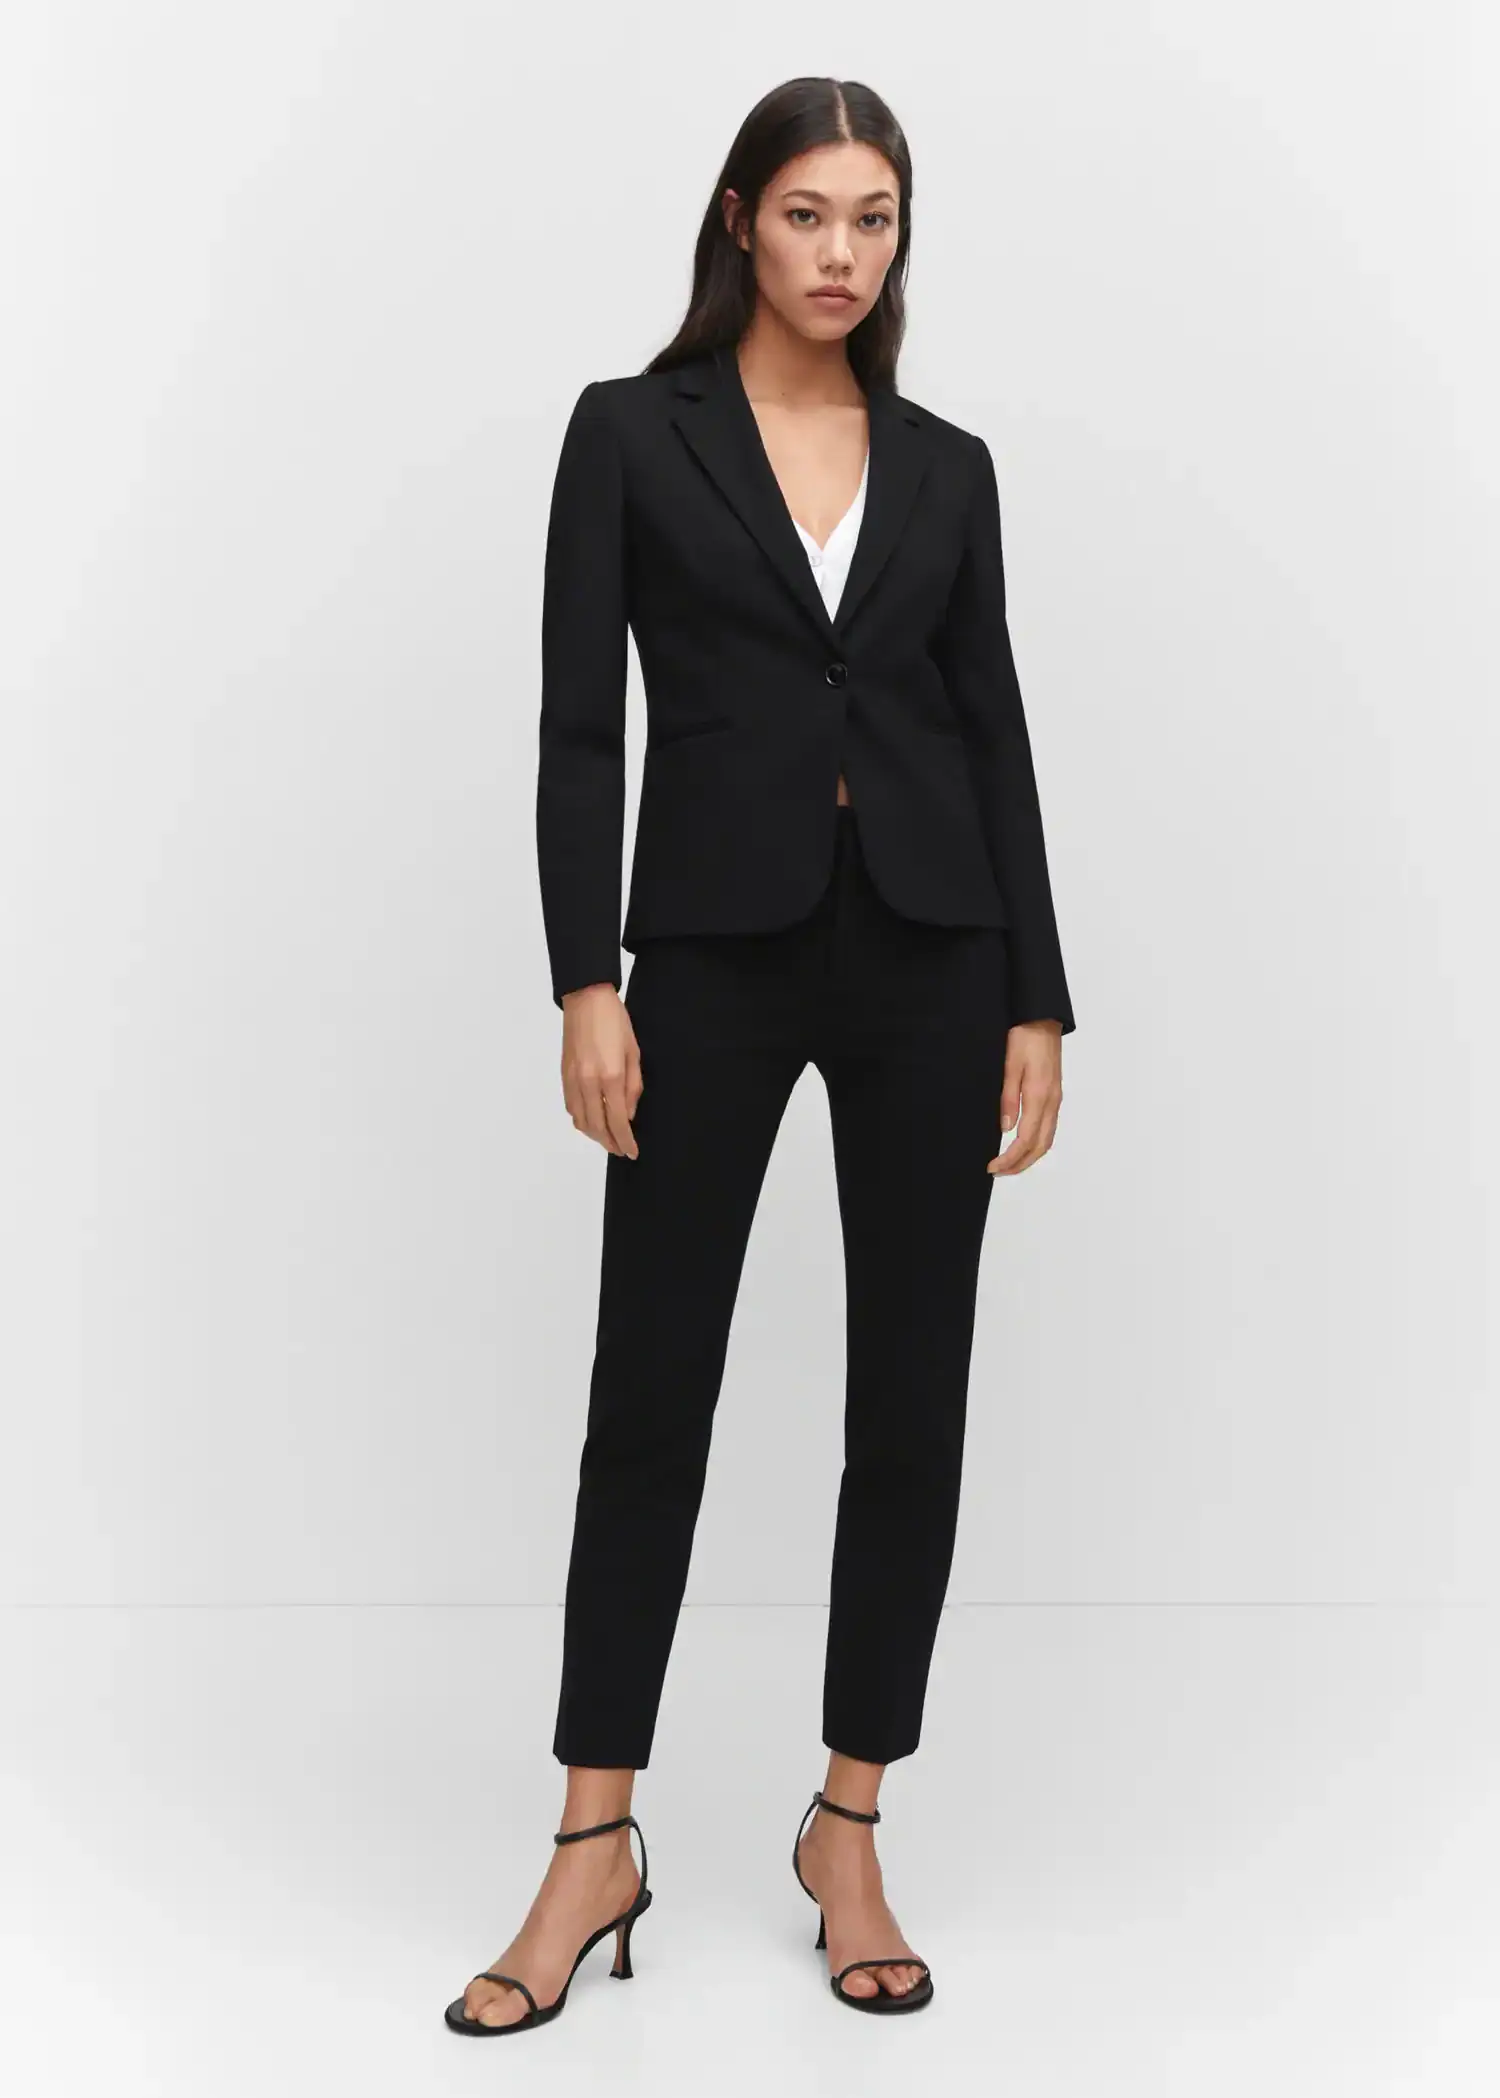 Mango Fitted jacket with blunt stitching. a woman wearing a black suit standing in front of a white wall. 